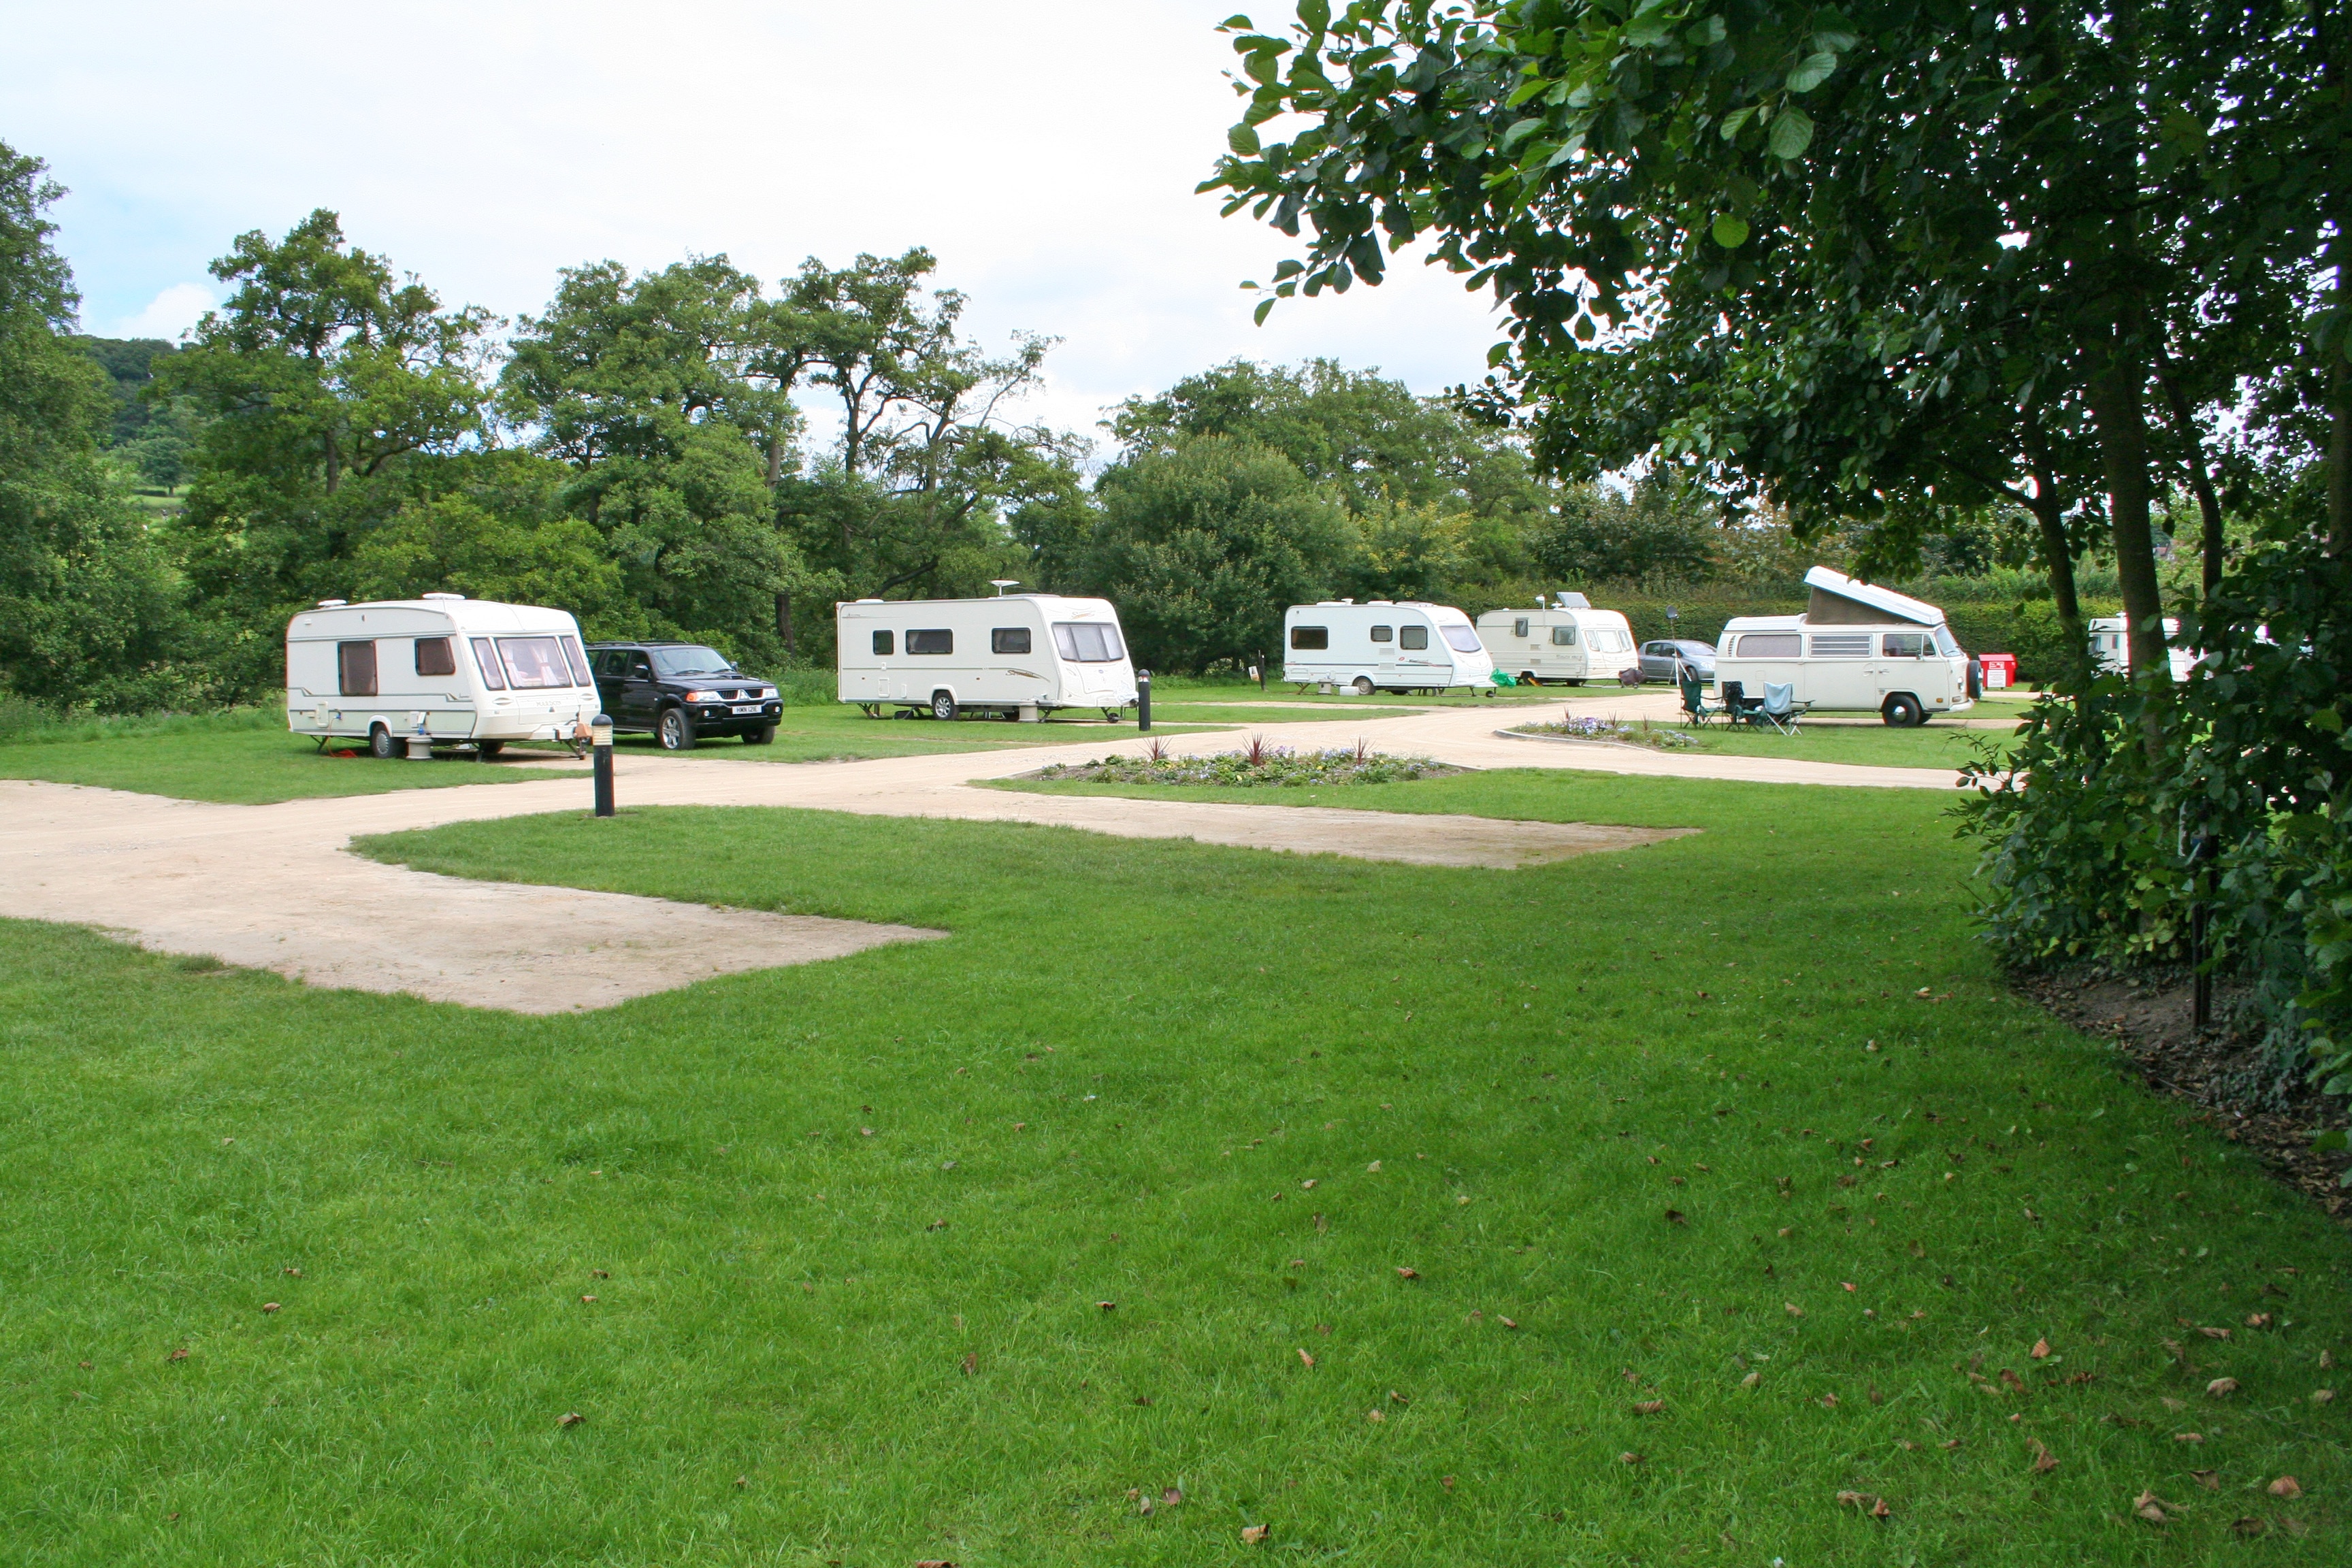 The Grouse and Claret Holiday Park